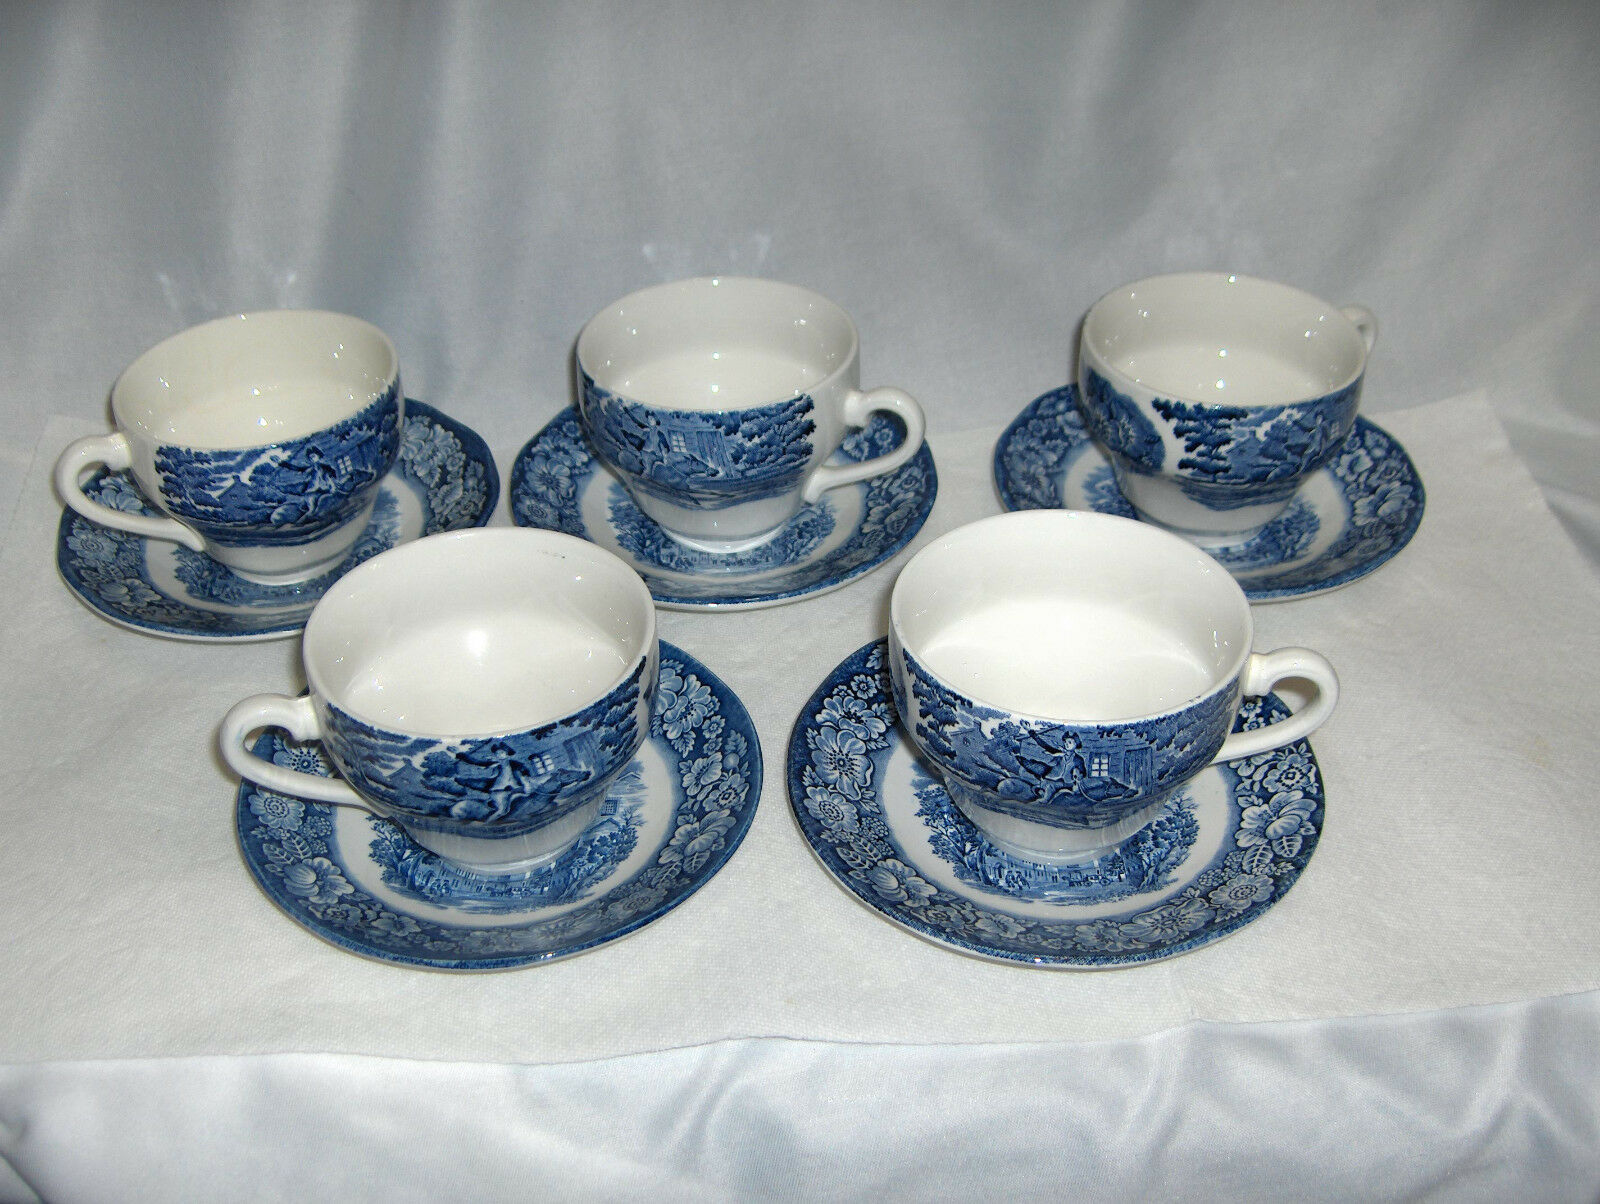 Primary image for 10 Pc Vntg Cup Sets Staffordshire China England Liberty Blue Old North Church